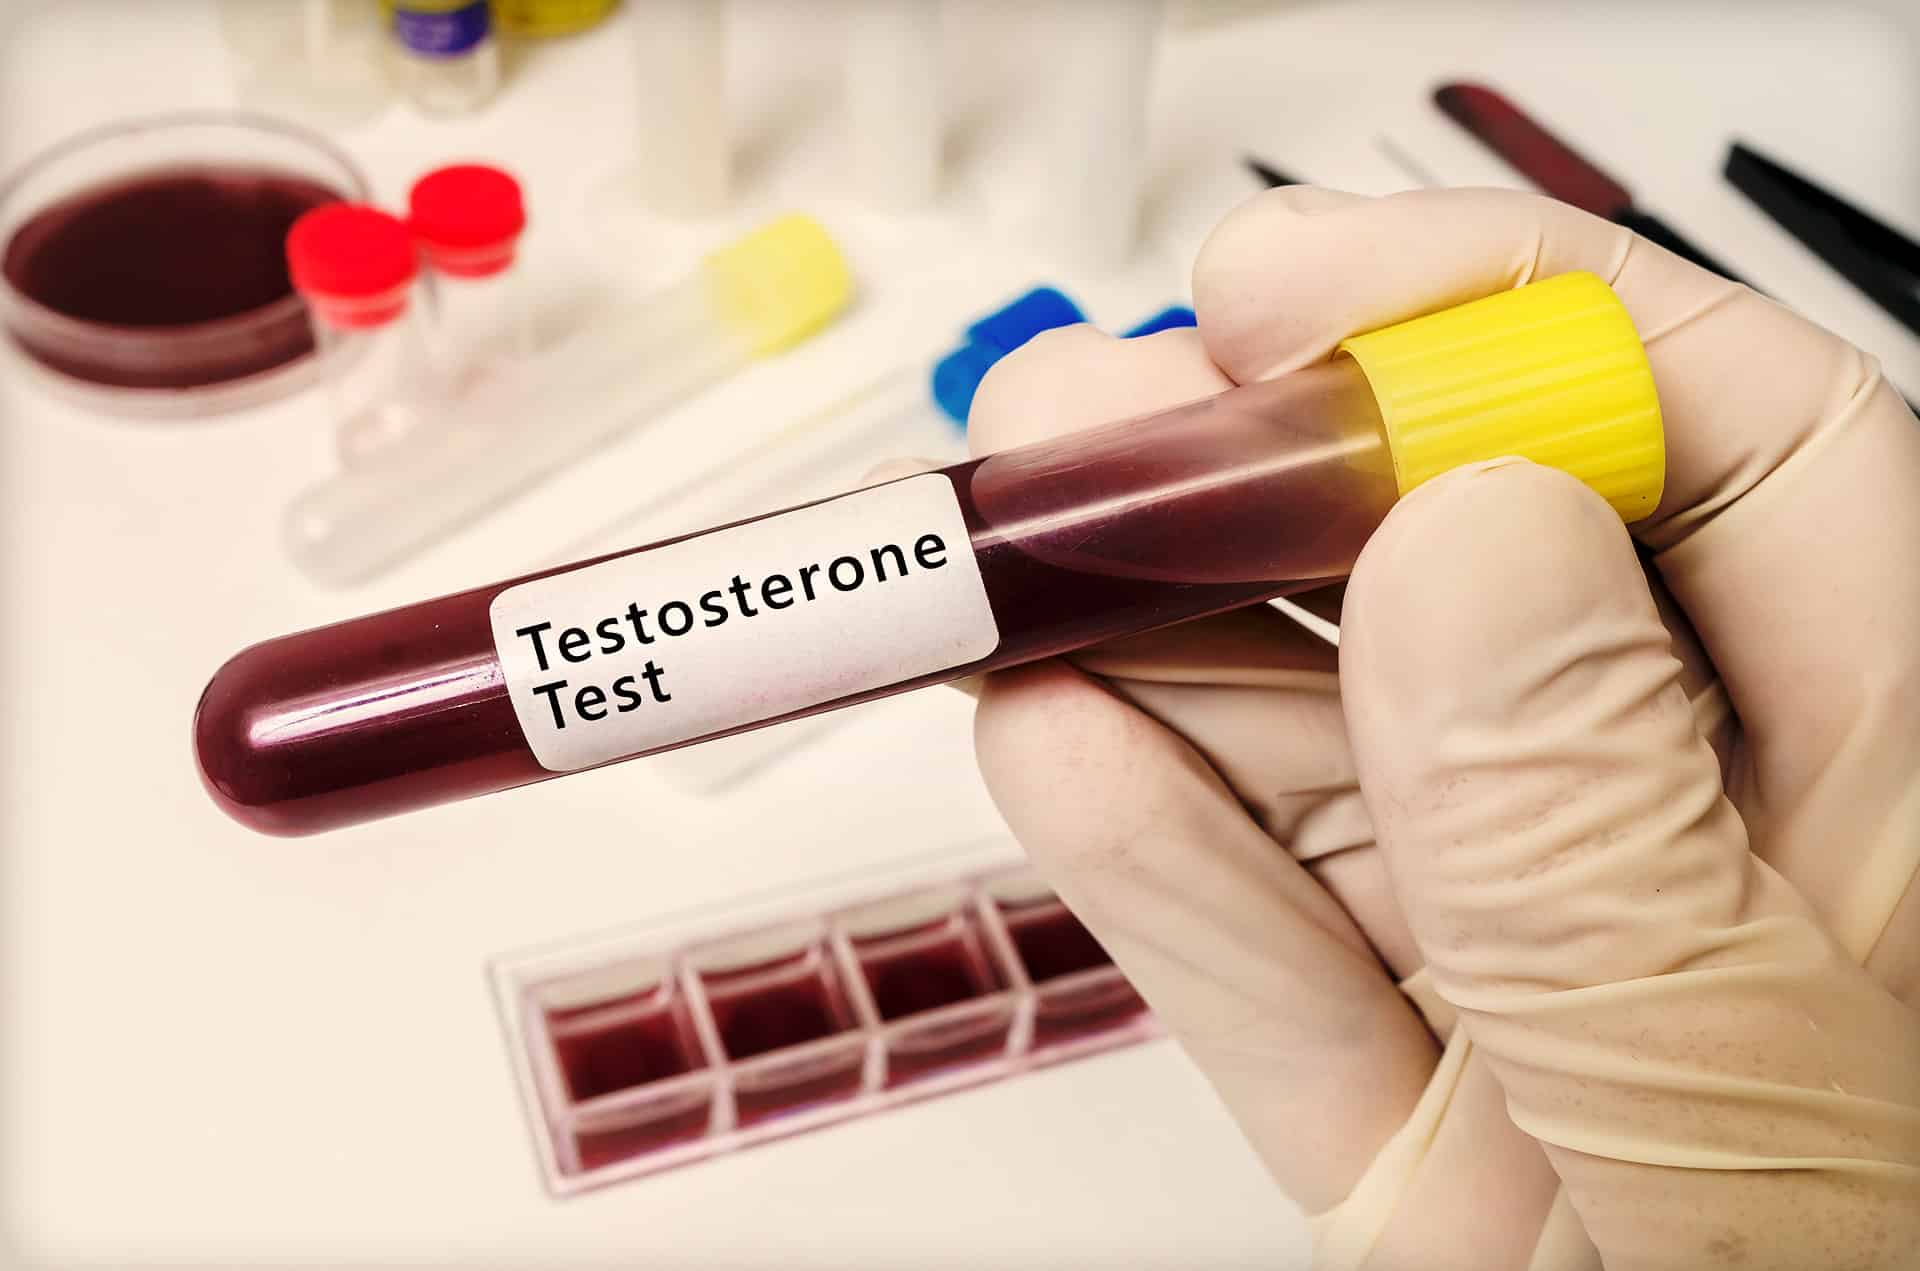 Testosterone Test Kit Home: Your T Under Your Control